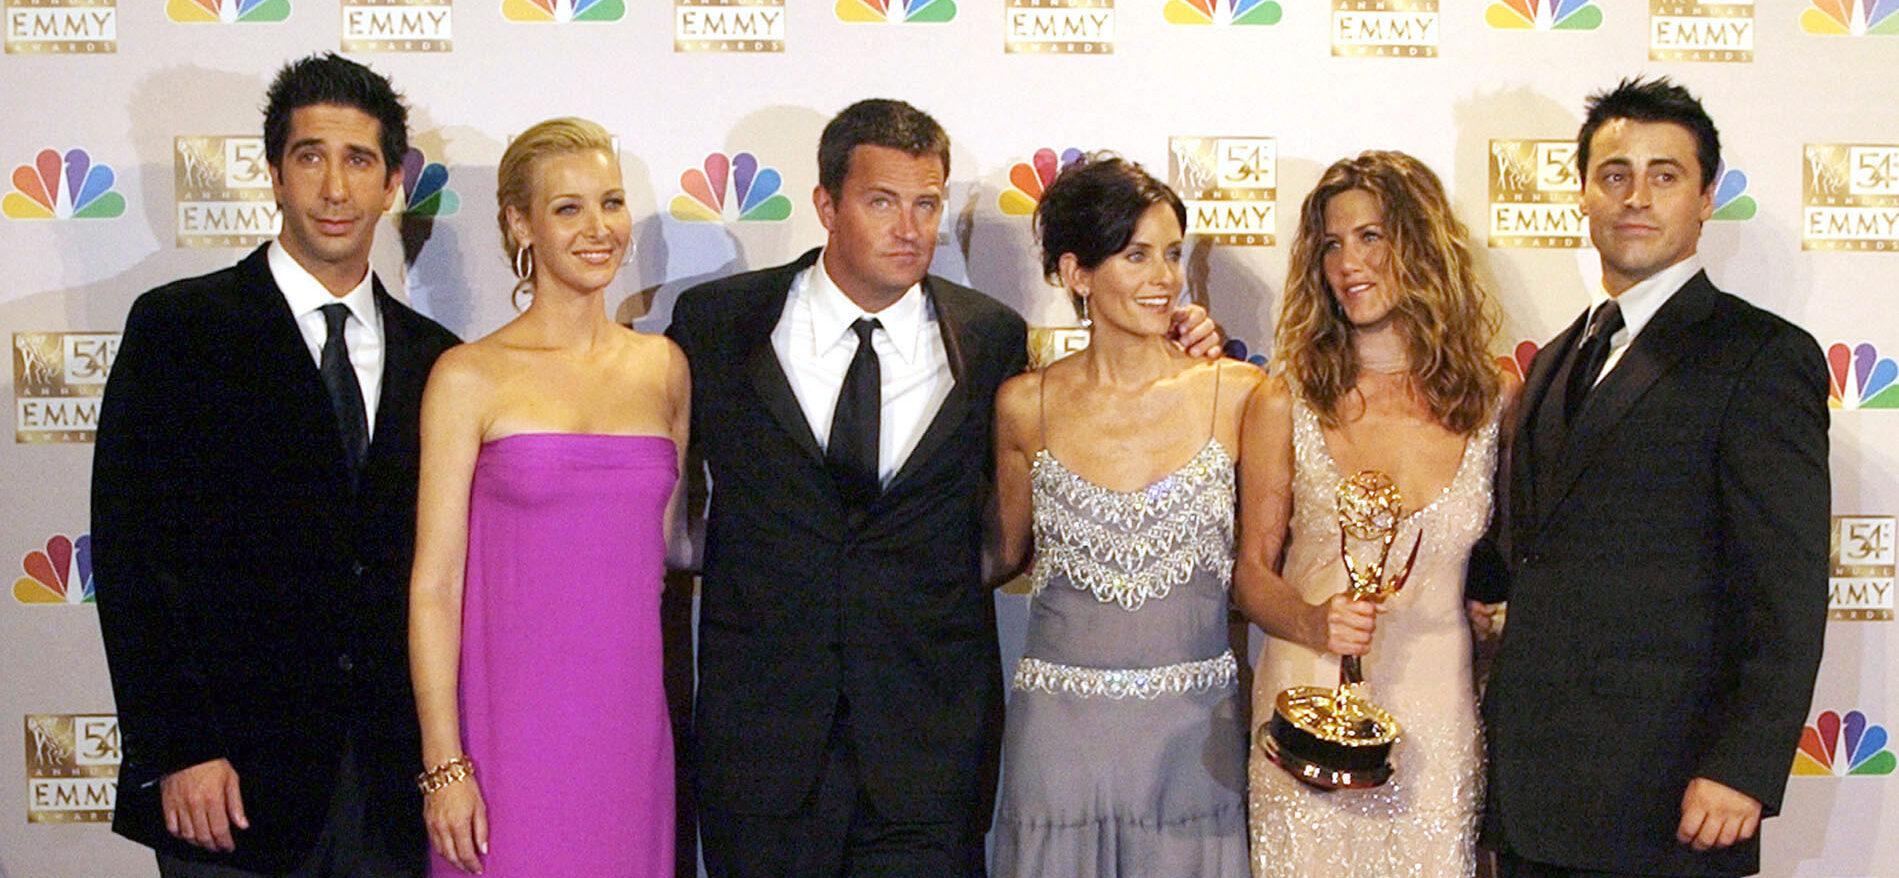 Bob Saget’s Widow Advises ‘Friends’ Cast On Coping With Matthew Perry’s Death